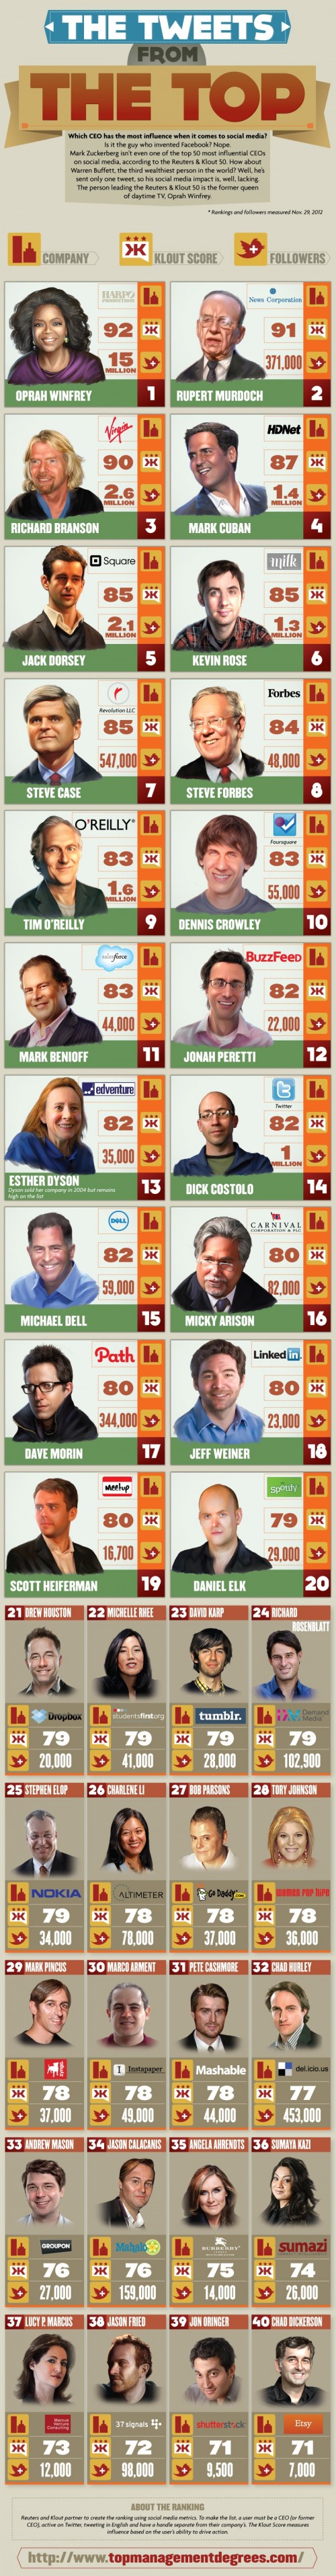 Oprah Is The Most Influential CEO In Social Media (Infographic)